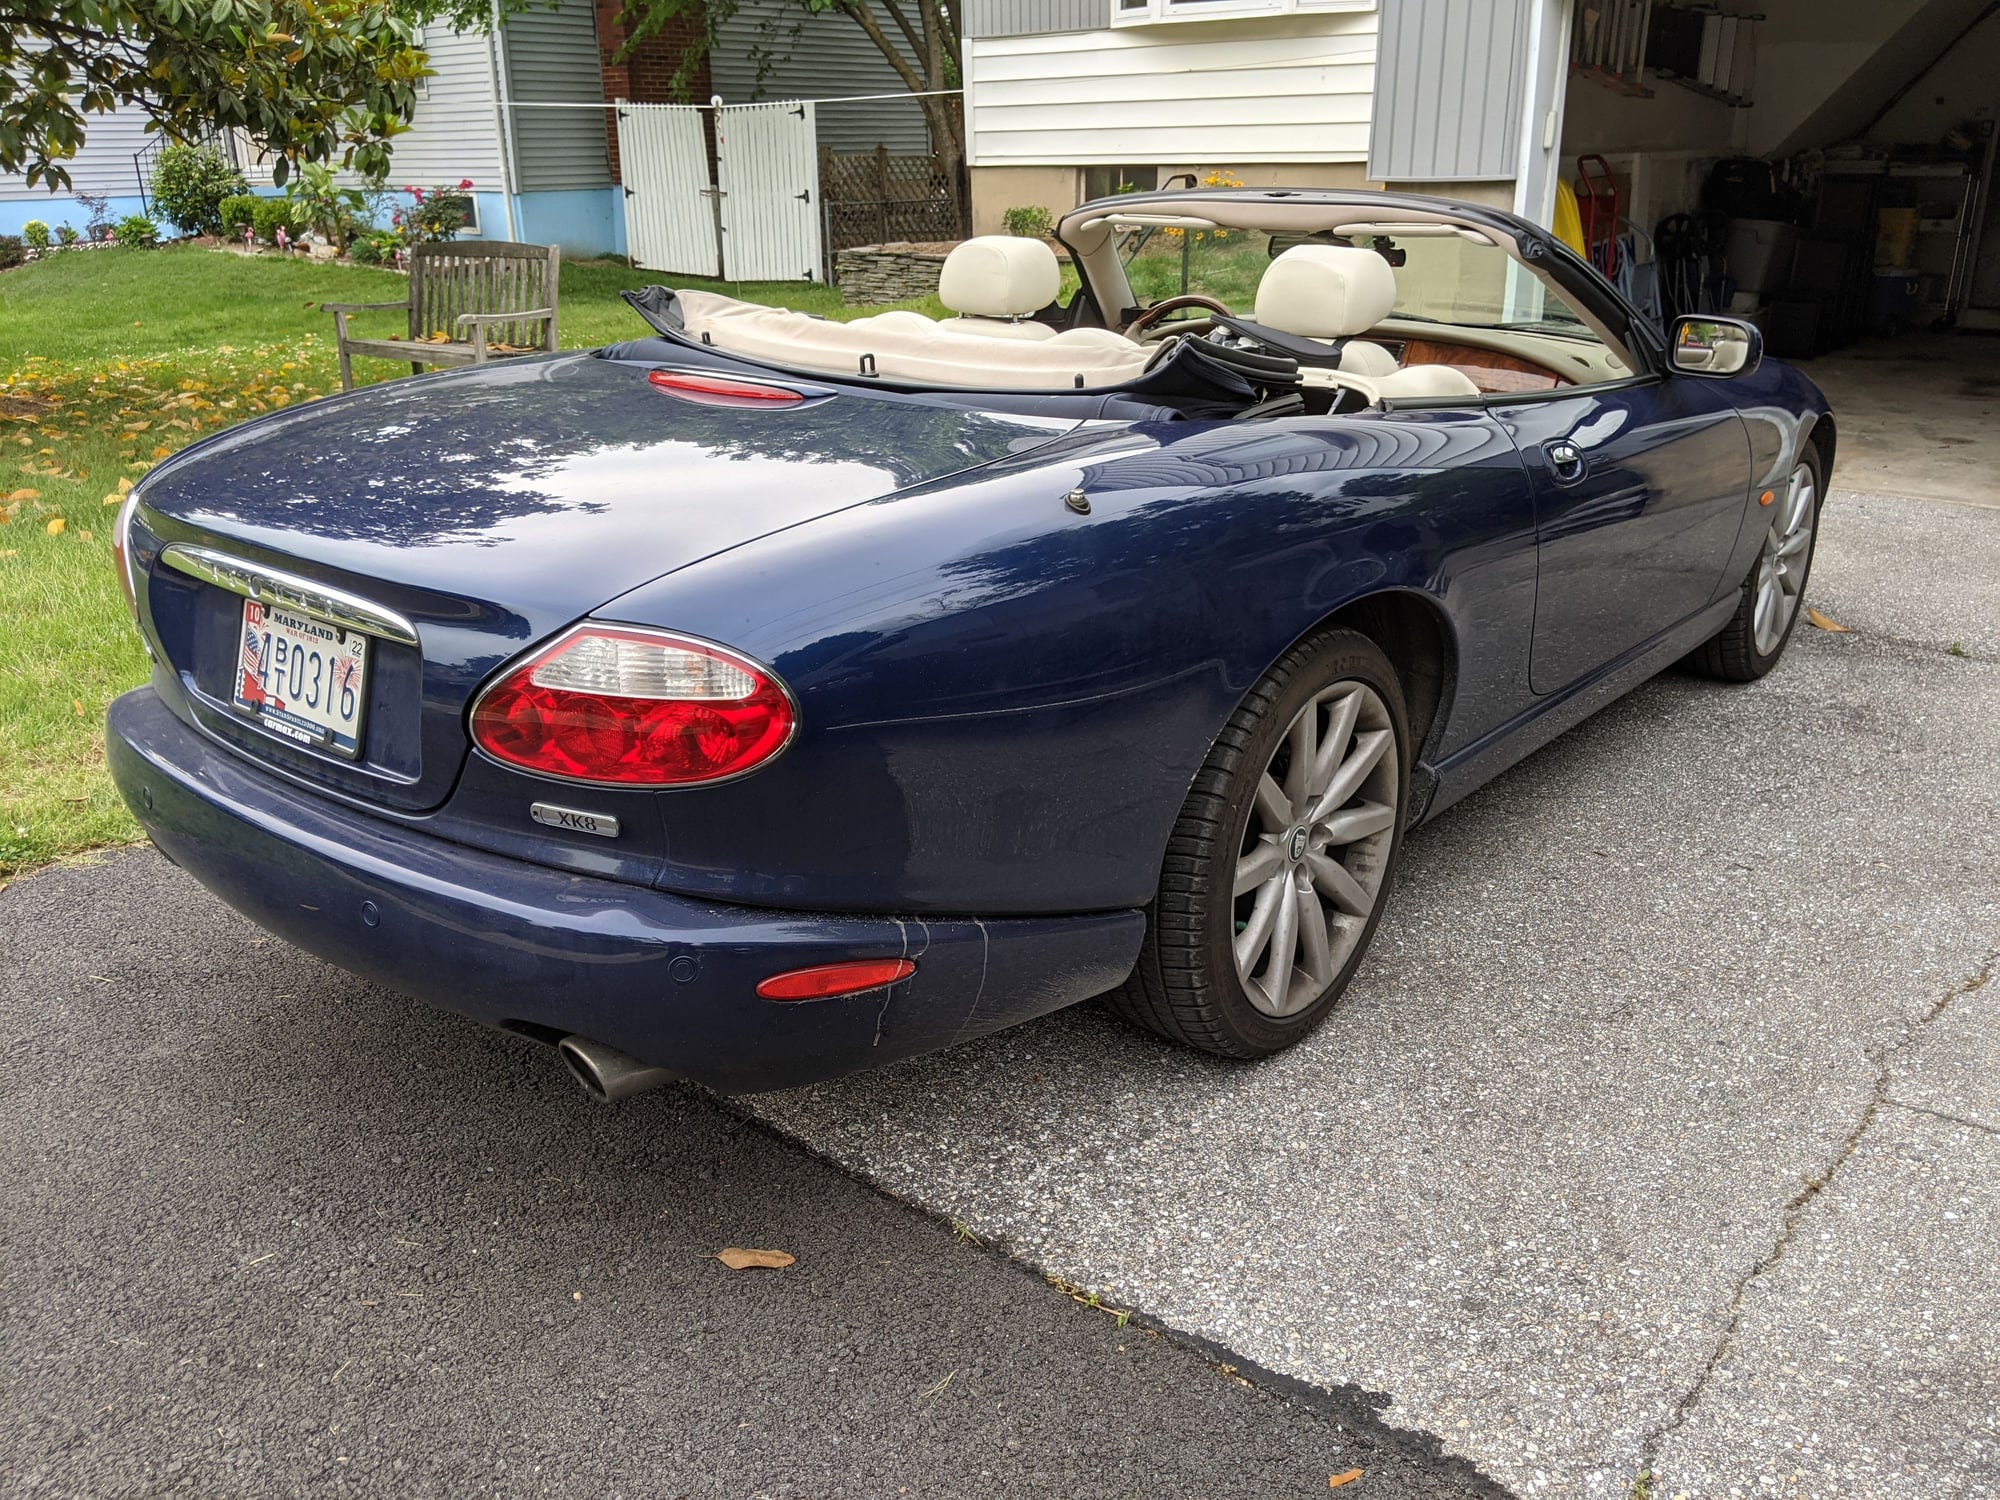 2006 Jaguar XK8 - Just in time for Summer in a Drop-Top - Used - VIN SAJDA42CX62A46434 - 89,000 Miles - 8 cyl - 2WD - Automatic - Convertible - Blue - College Park, MD 20740, United States